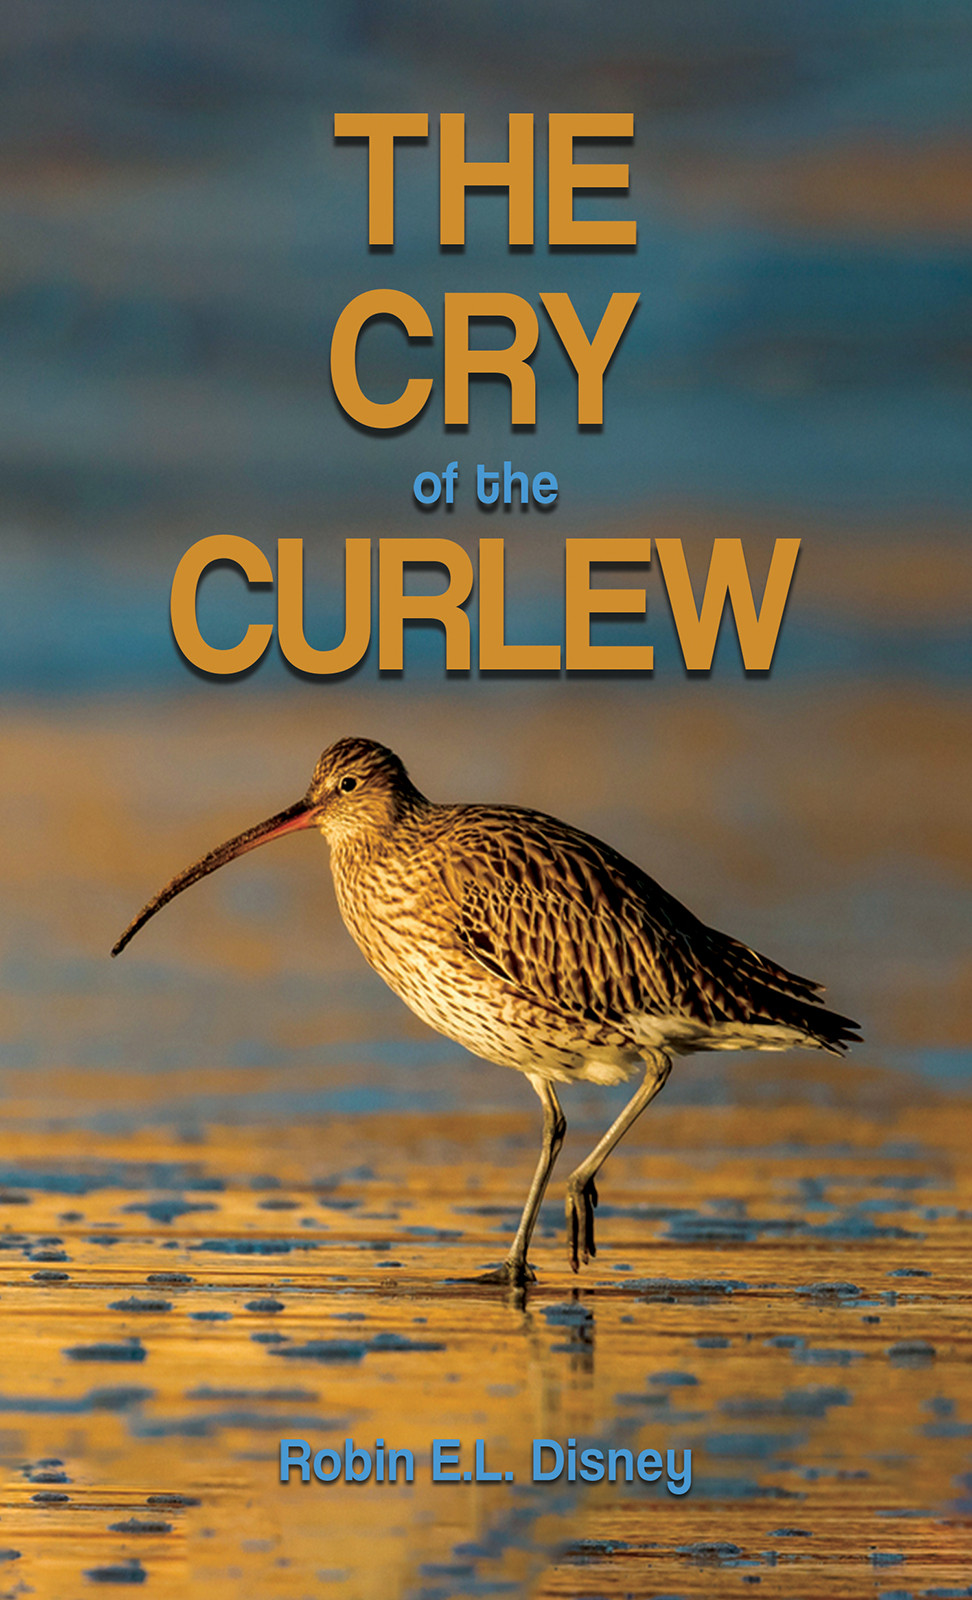 The Cry of the Curlew